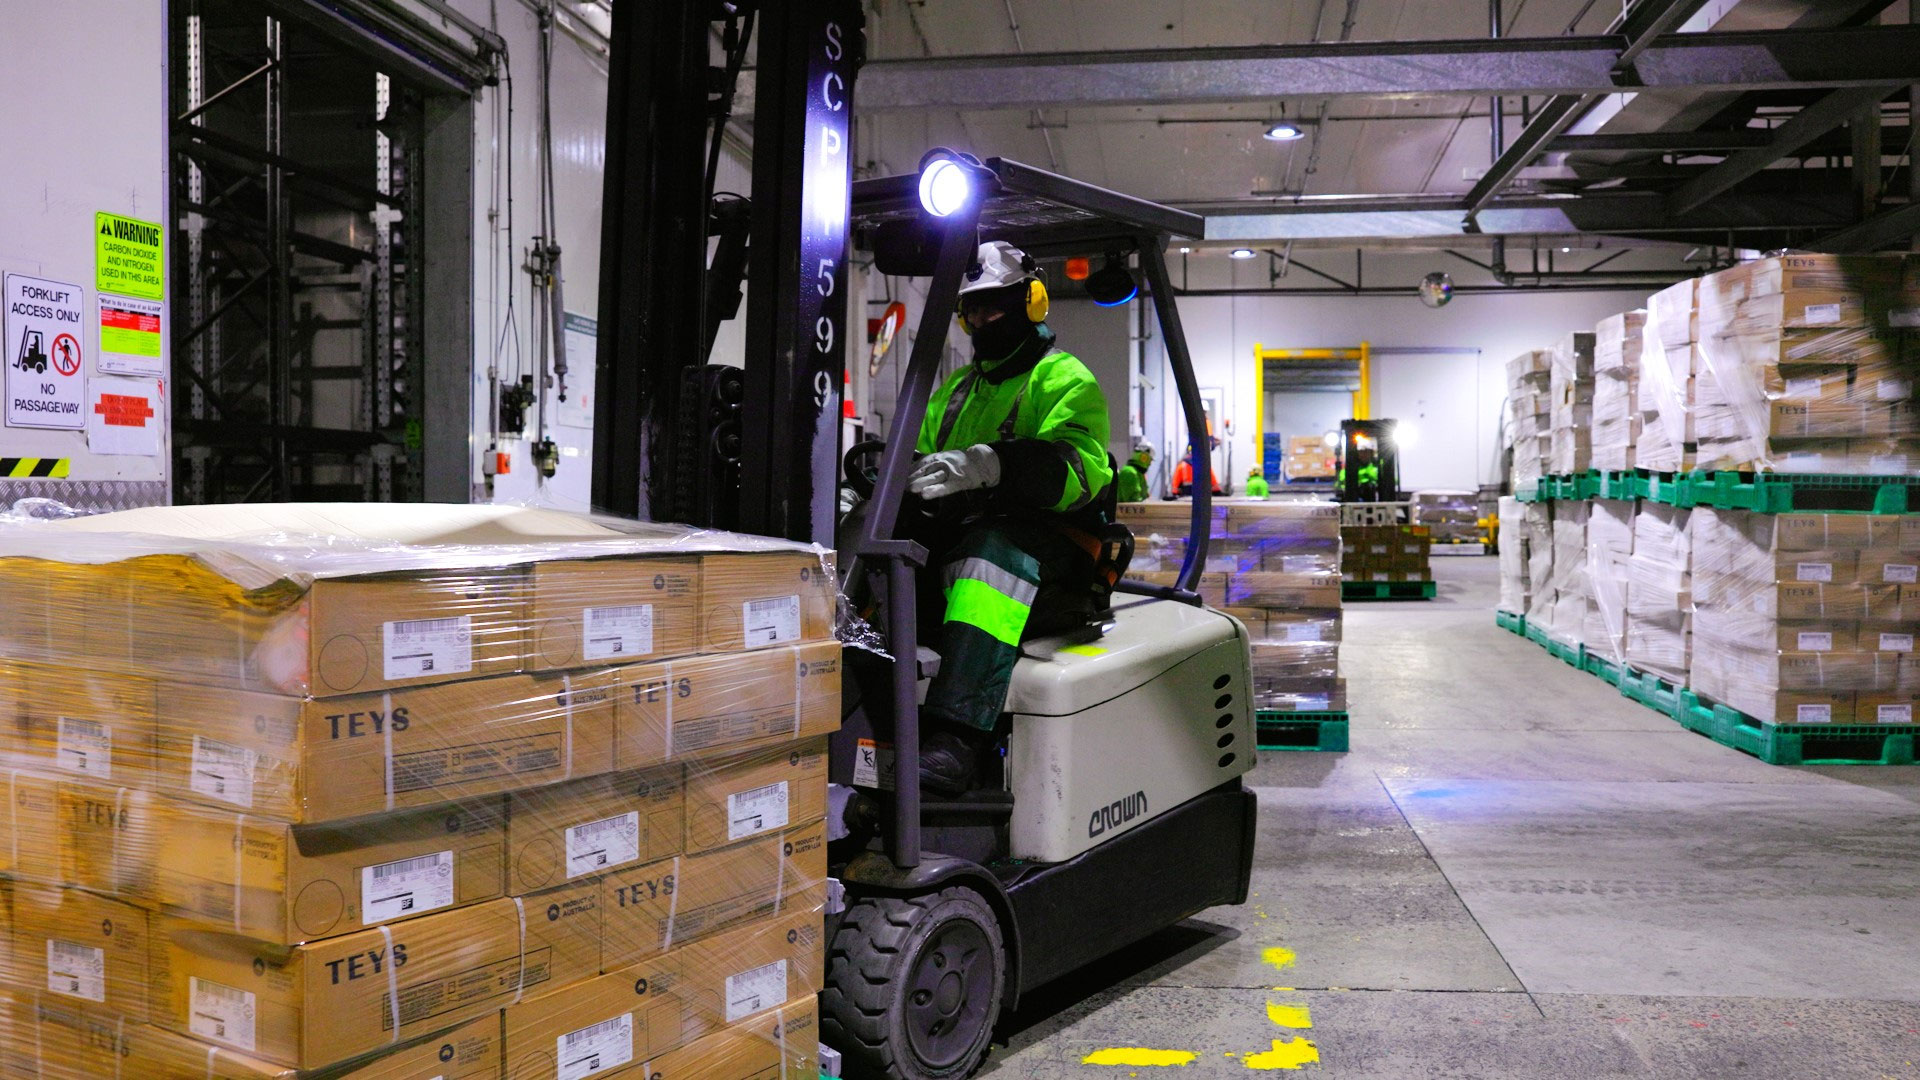 Workers move palettes in a warehouse